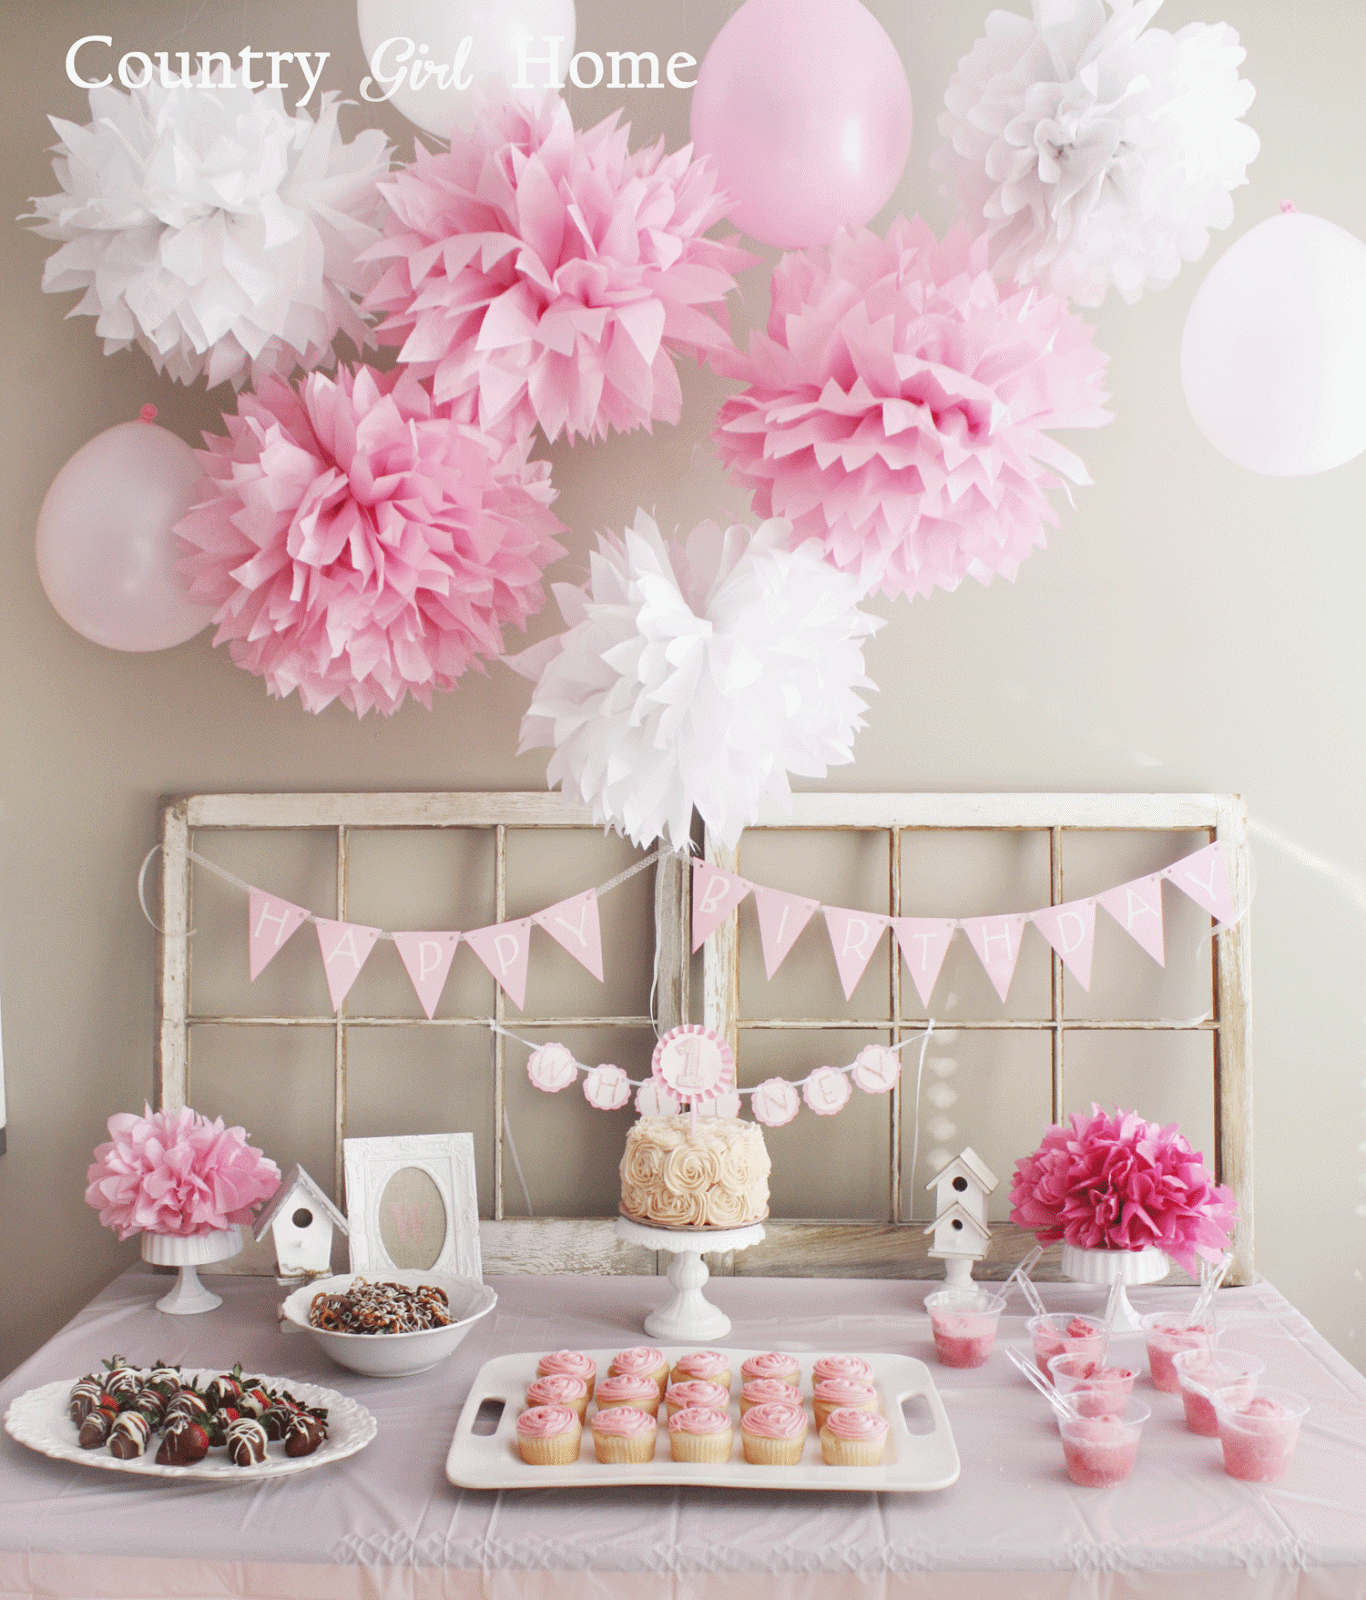 COUNTRY GIRL HOME 1st Birthday  